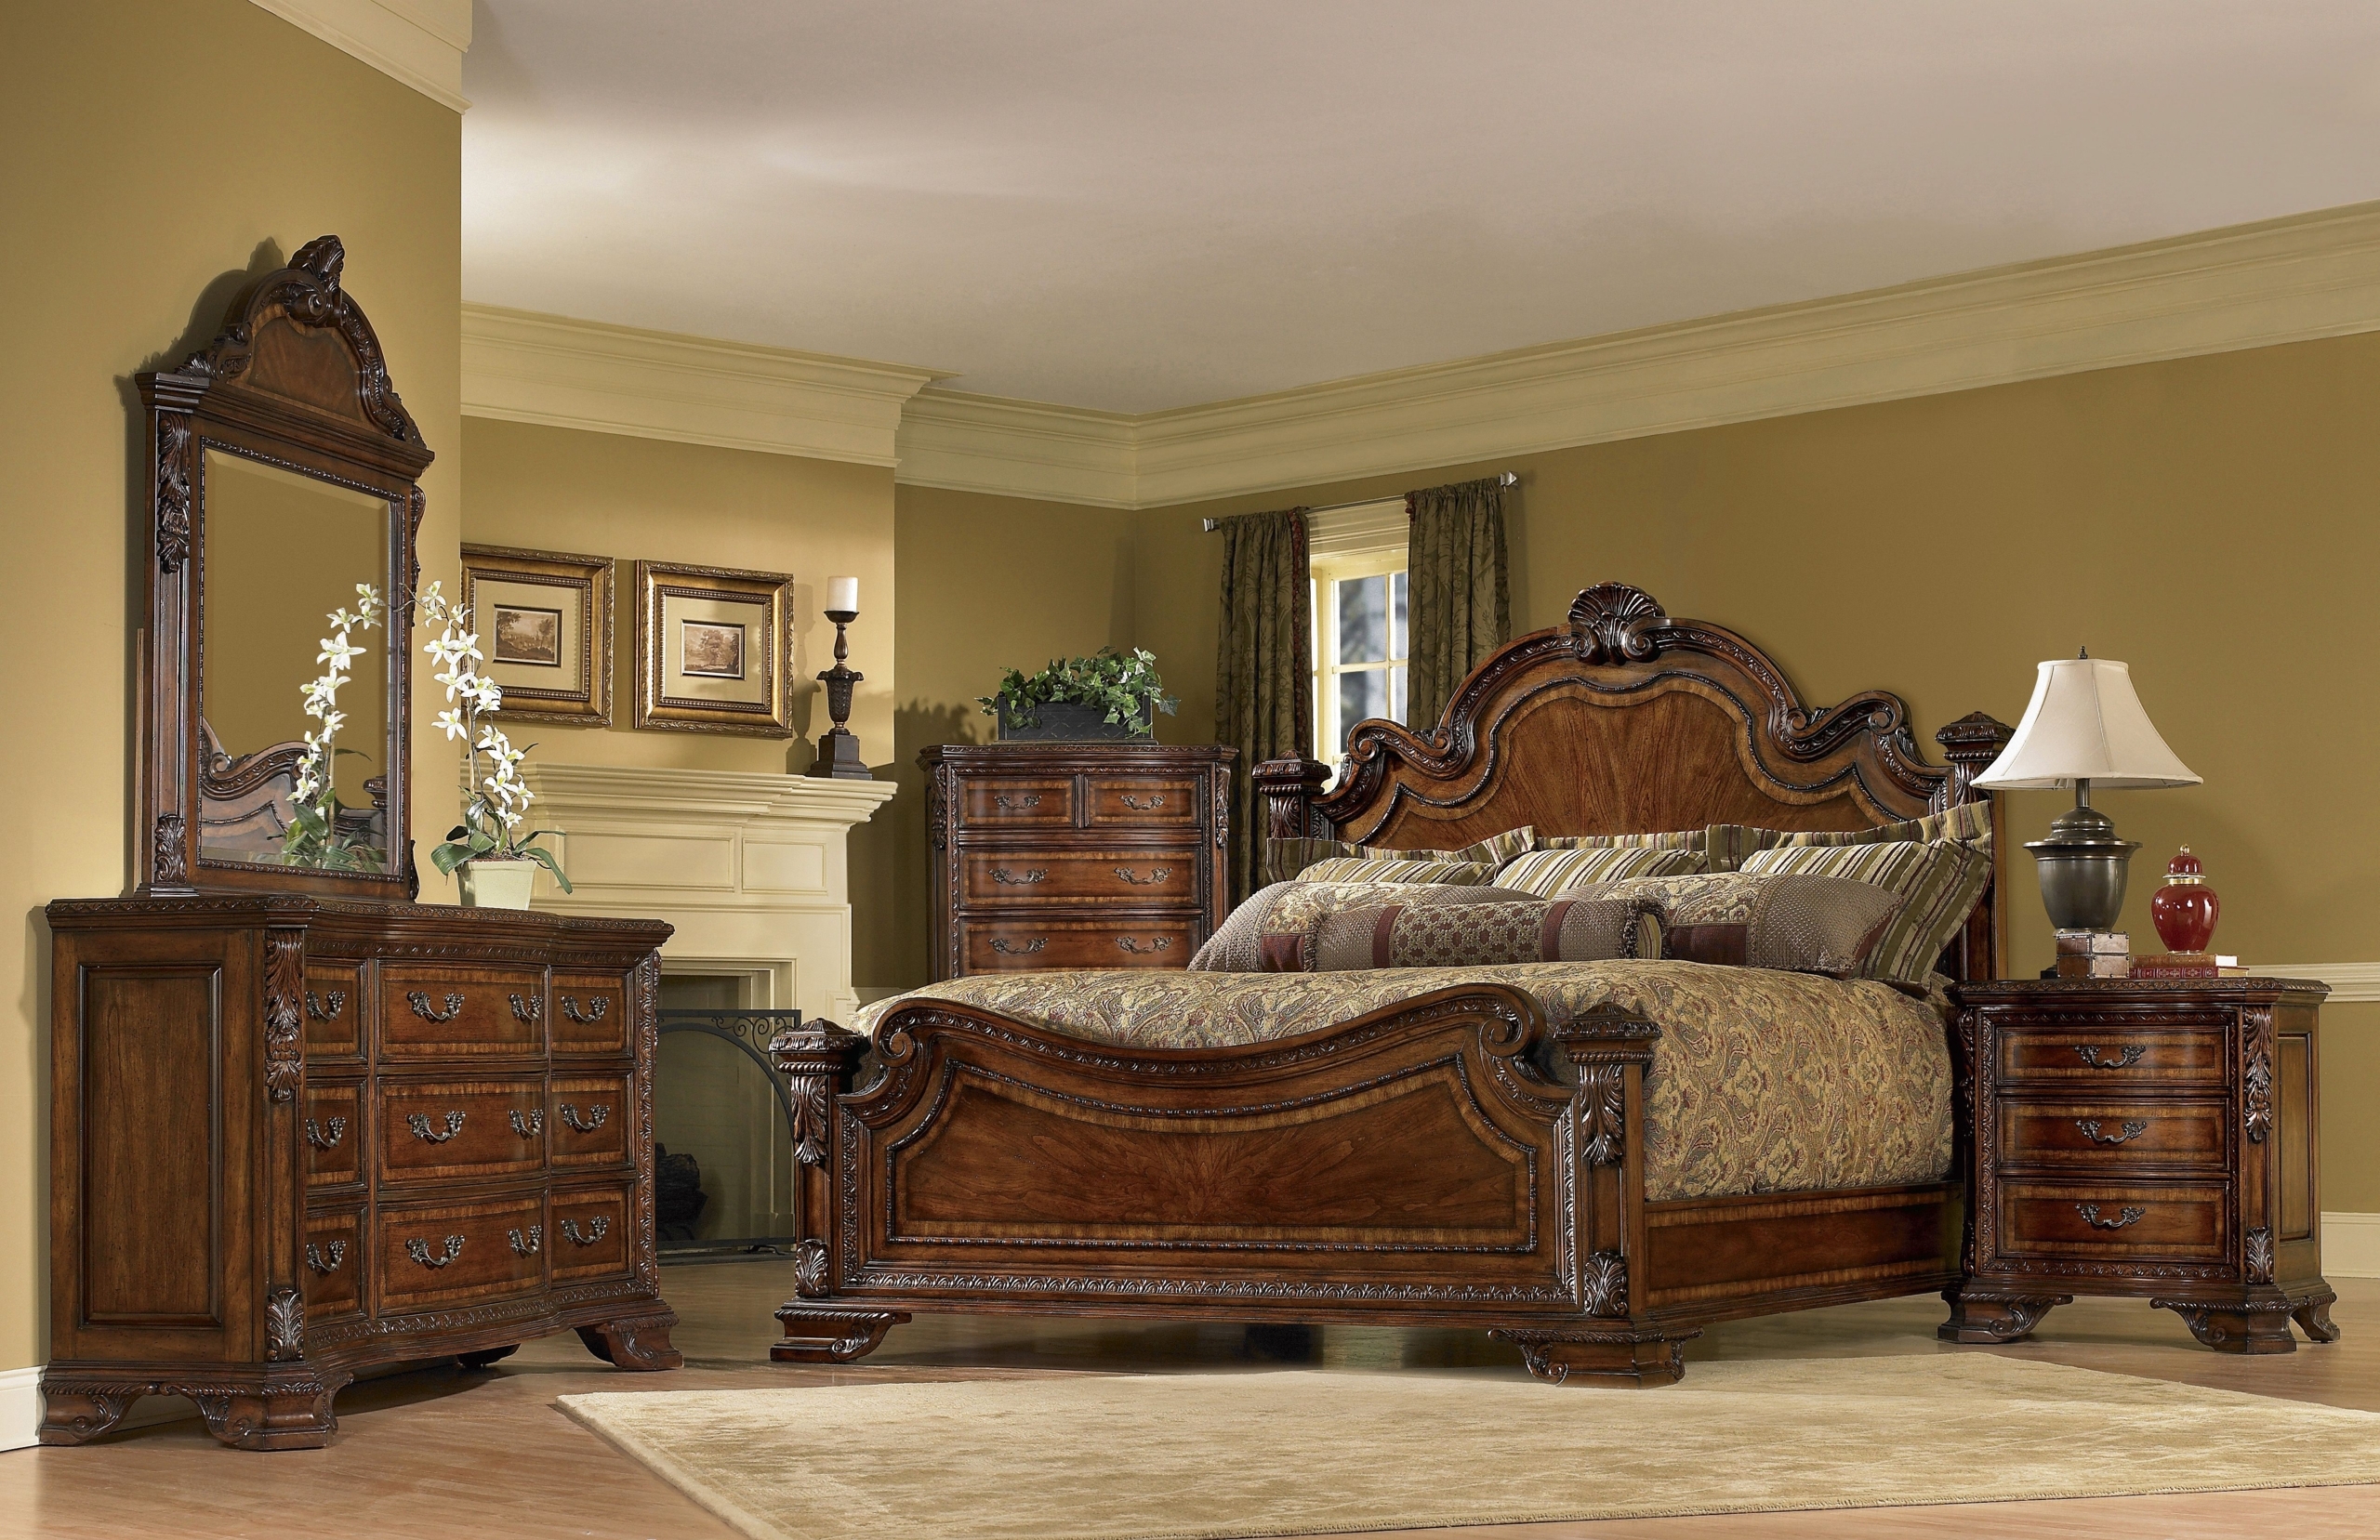 old style bedroom furniture prices